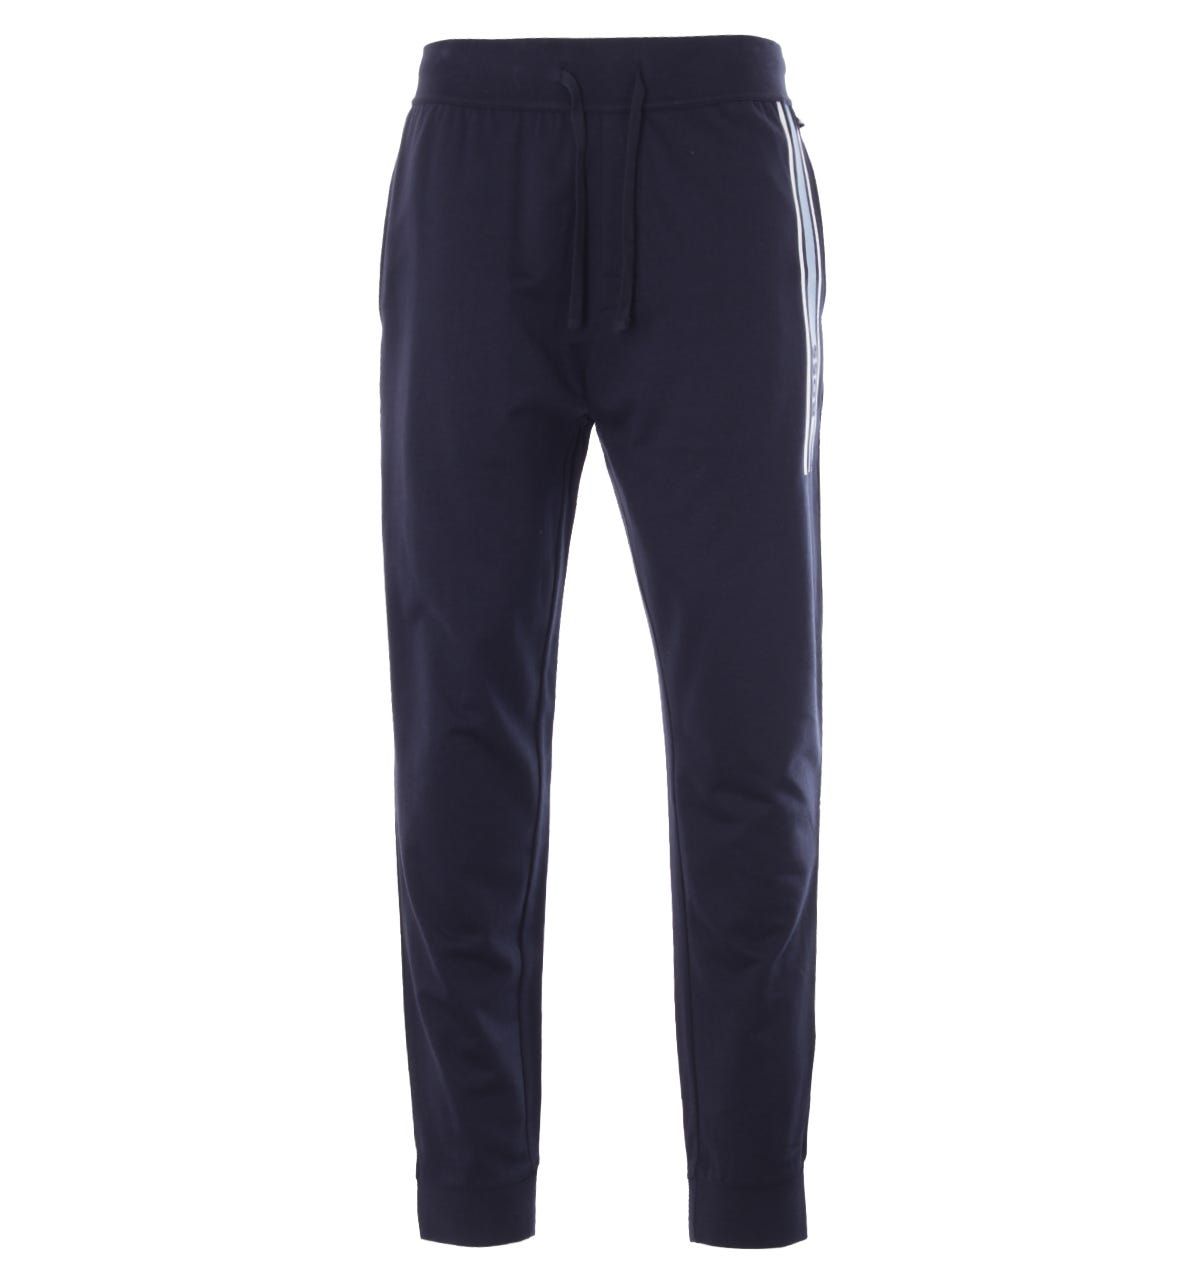 Super lightweight and perfect for lounging or sleeping. The Stripe Lounge Joggers from BOSS Bodywear are crafted from pure cotton French terry, providing luxurious softness. Featuring an elasticated drawstring waist, twin side seam pockets and elasticated ankle cuffs. Finished the signature BOSS logo printed at the left leg with contrasting stripes.Regular Fit, Pure Cotton French Terry, Adjustable Drawstring Waistband, Twin Side Seam Pockets, Elasticated Ankle Cuffs, Contrast Stripes, BOSS Branding. Style & Fit:Regular Fit, Fits True to Size. Care & Composition:100% Cotton, Machine Wash.